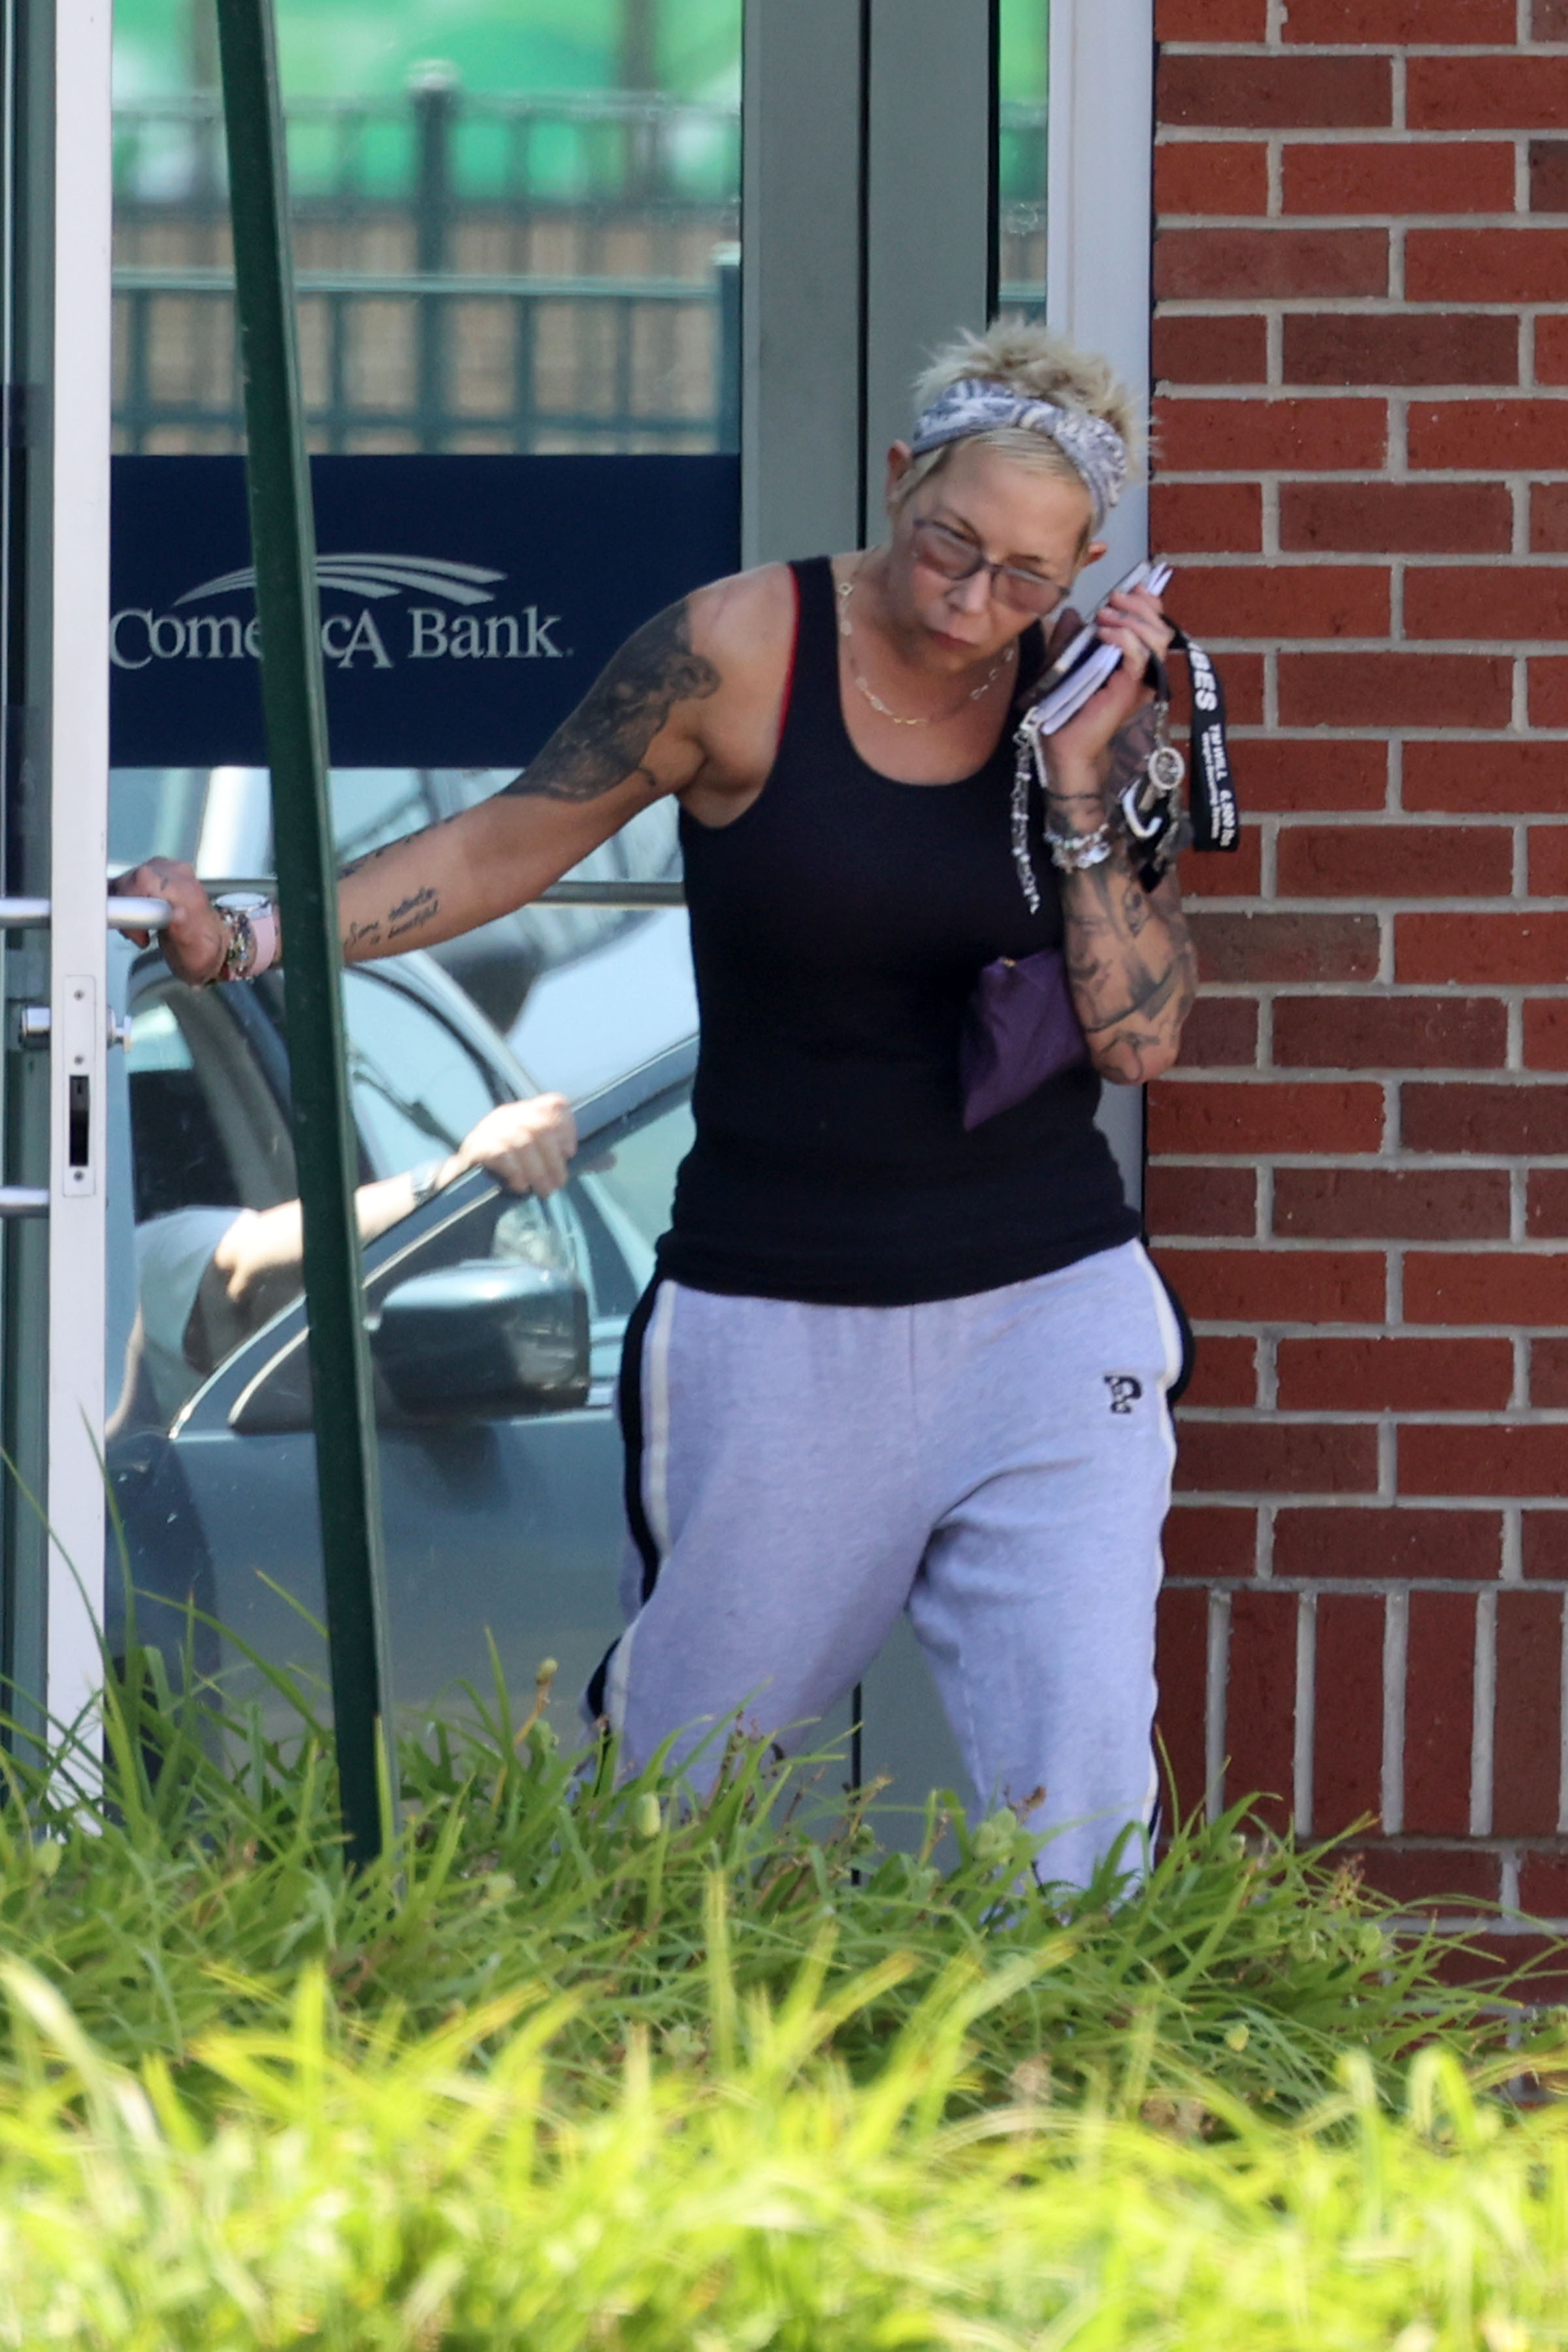 Tattooed Kim Mathers was seen holding her phone to her ear as she left the bank